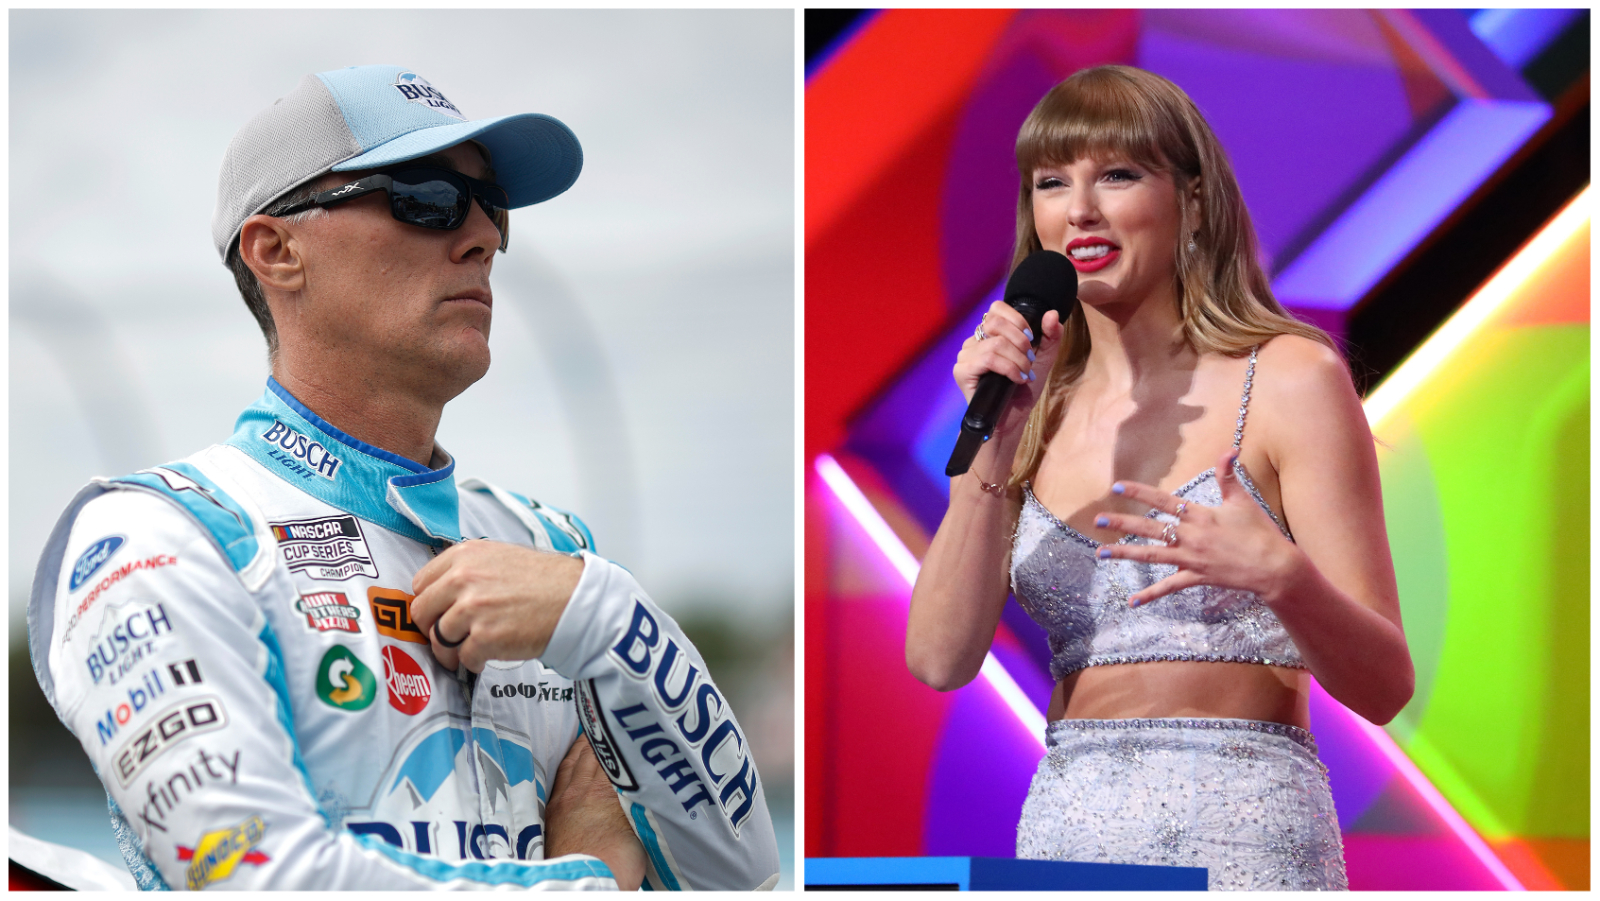 NASCAR Cup Series driver Kevin Harvick and entertainer Taylor Swift.